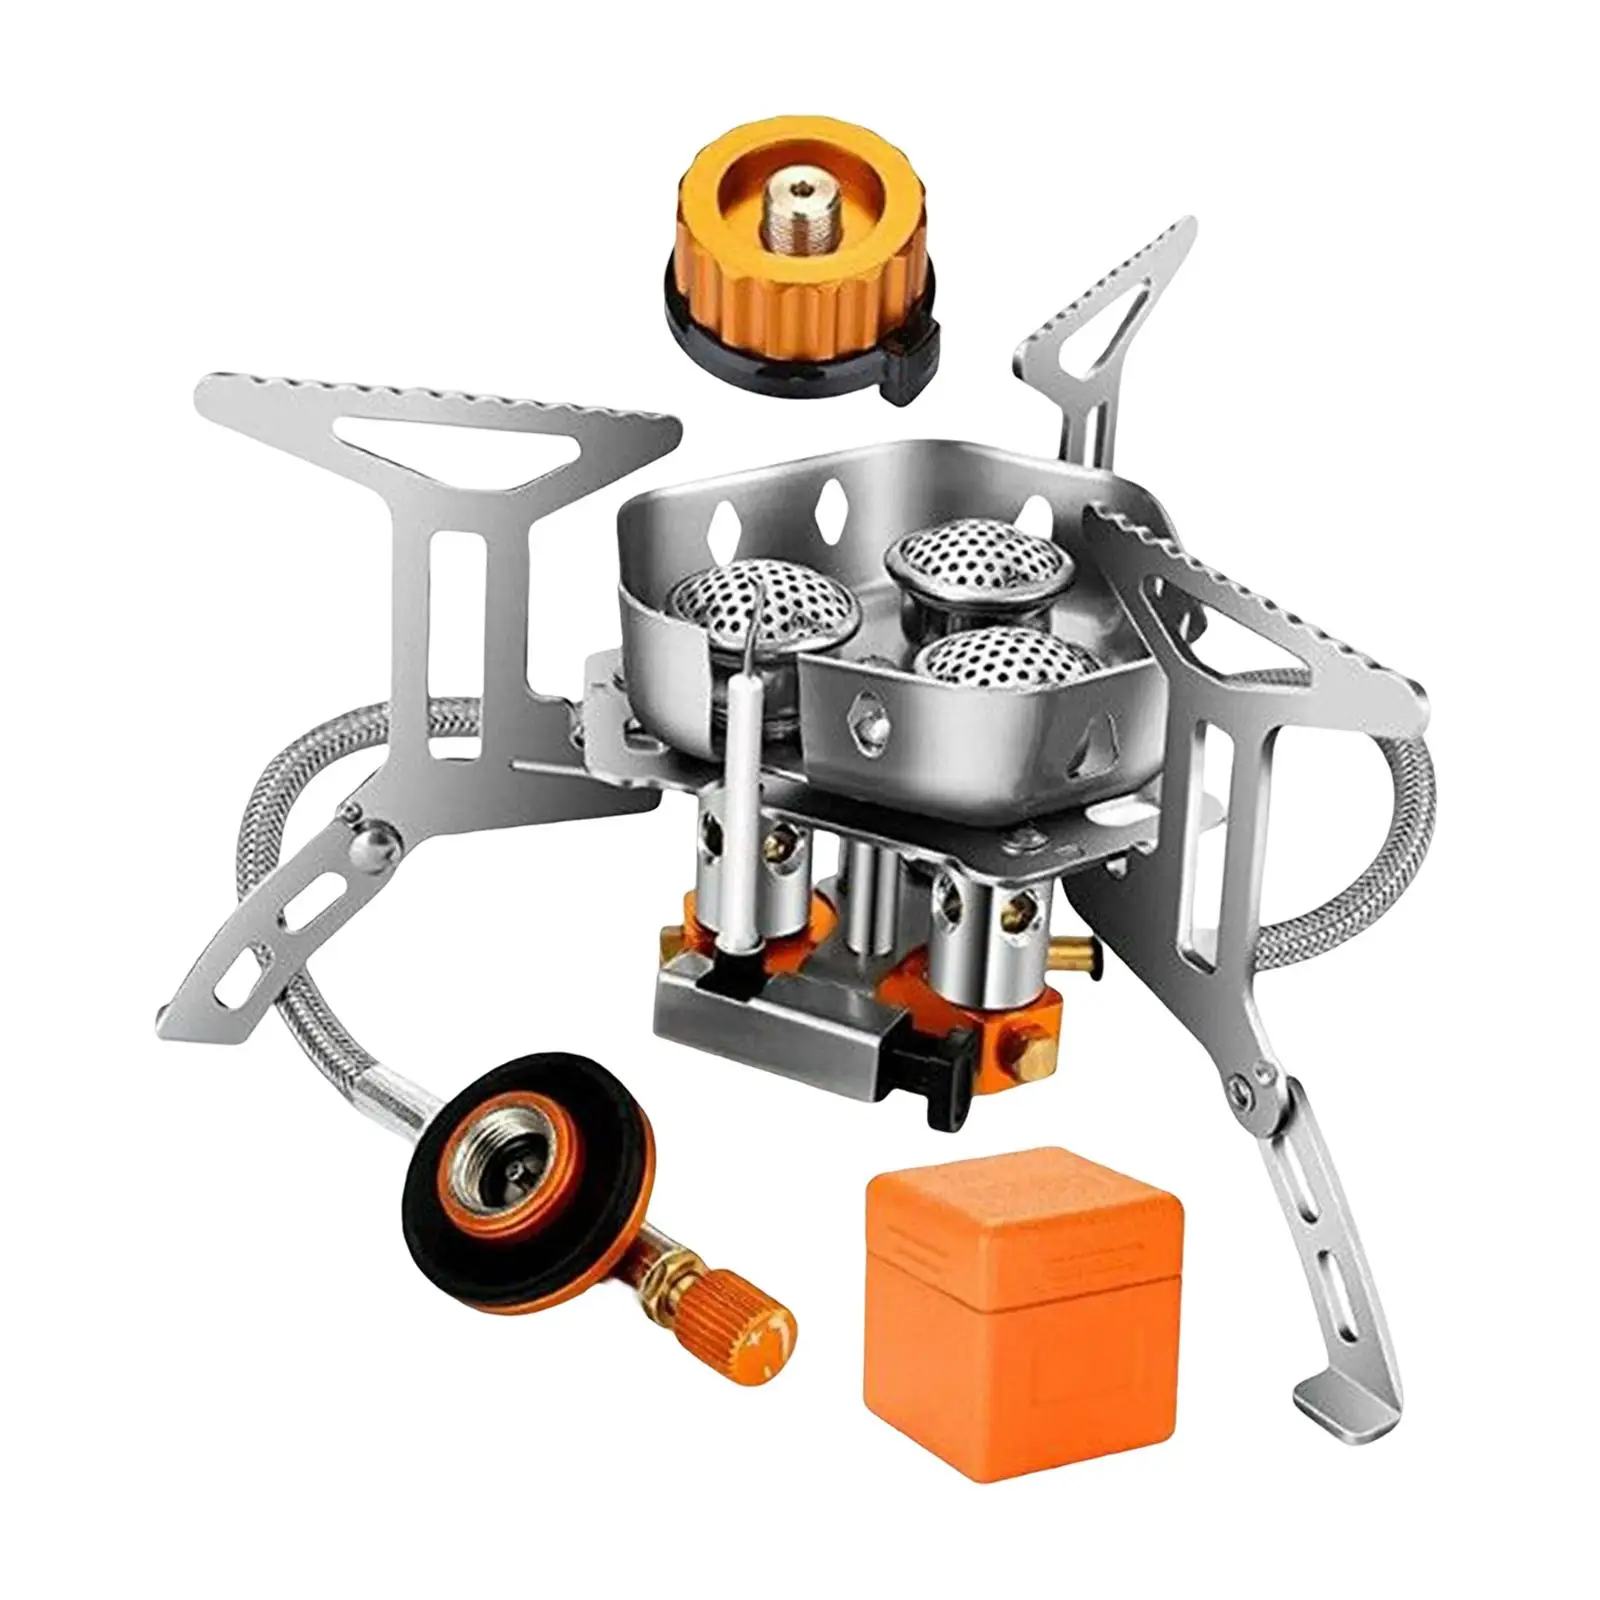 Folded Camping Gas Stove Split Burner with Fuel Canister Adapter Piezo Ignition Cookware Furnace Camp Stove for Picnic Propane